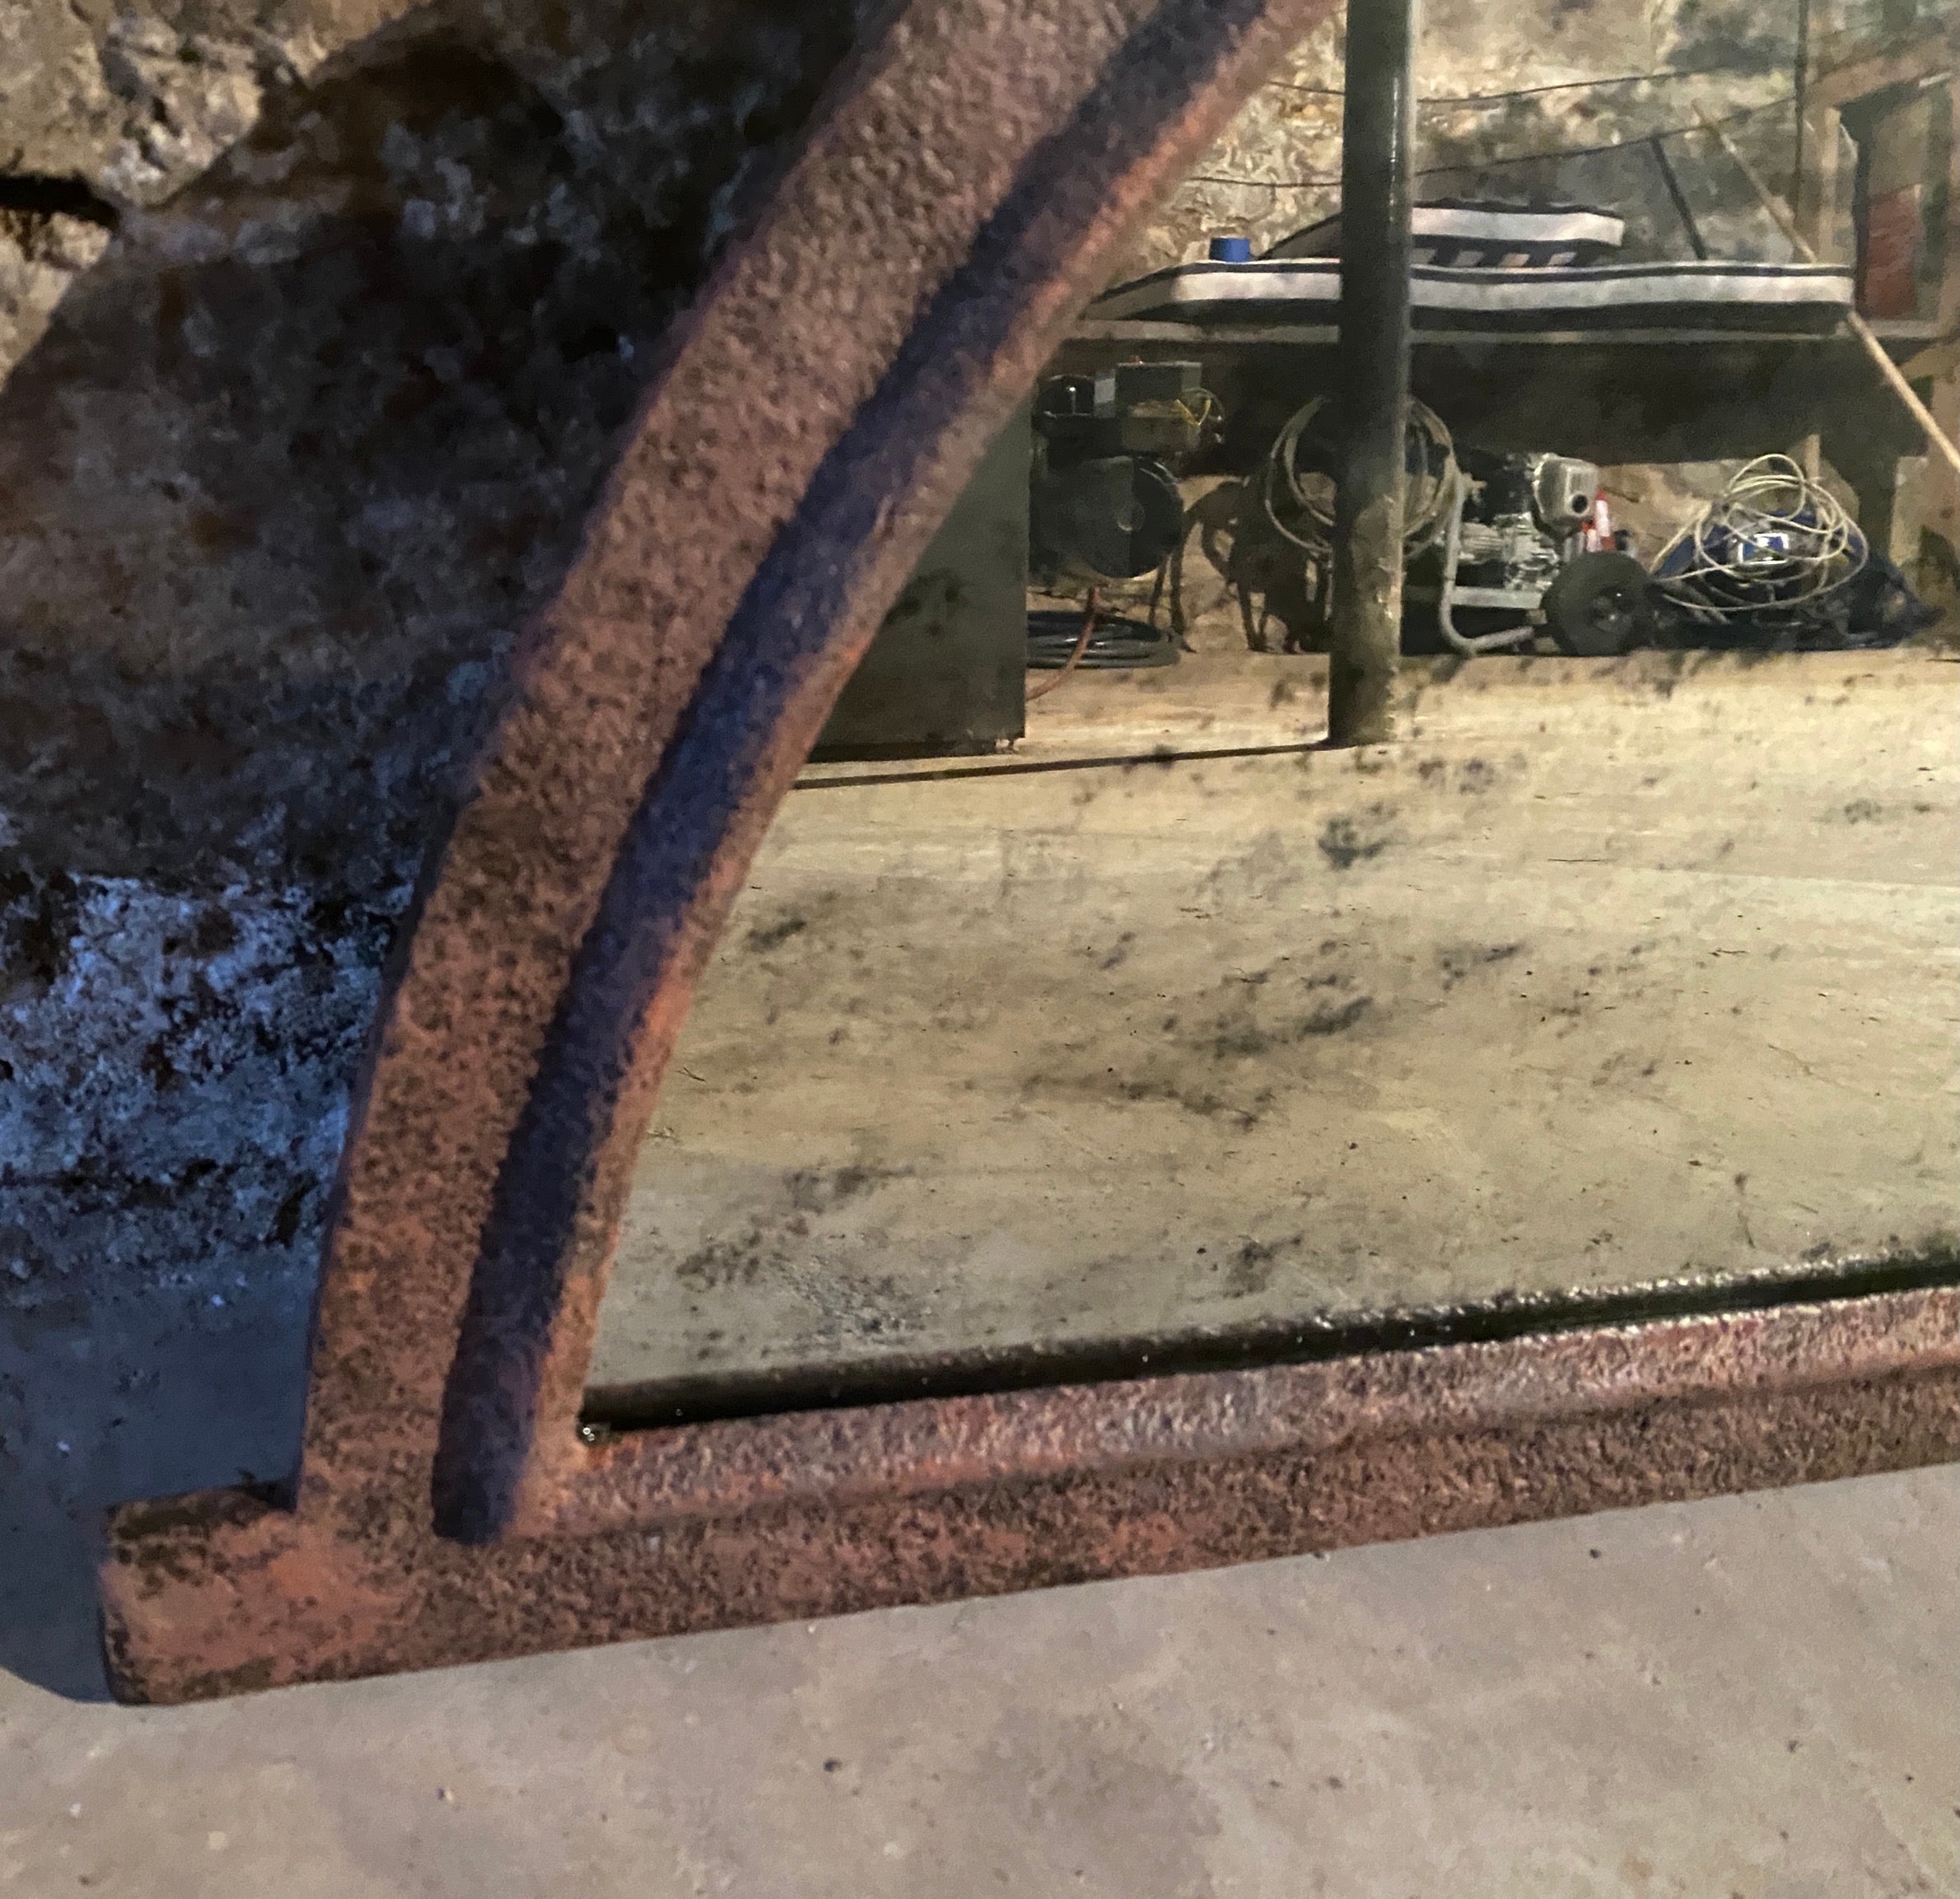 An unique size and shape antique Neo-classic Tuilleries Orangerie 37 x 19 h metal wall mirror with half round top made of hand crafted cast iron antique frame  that once was a window from French chateau with inserted mirrored panels. The mirror